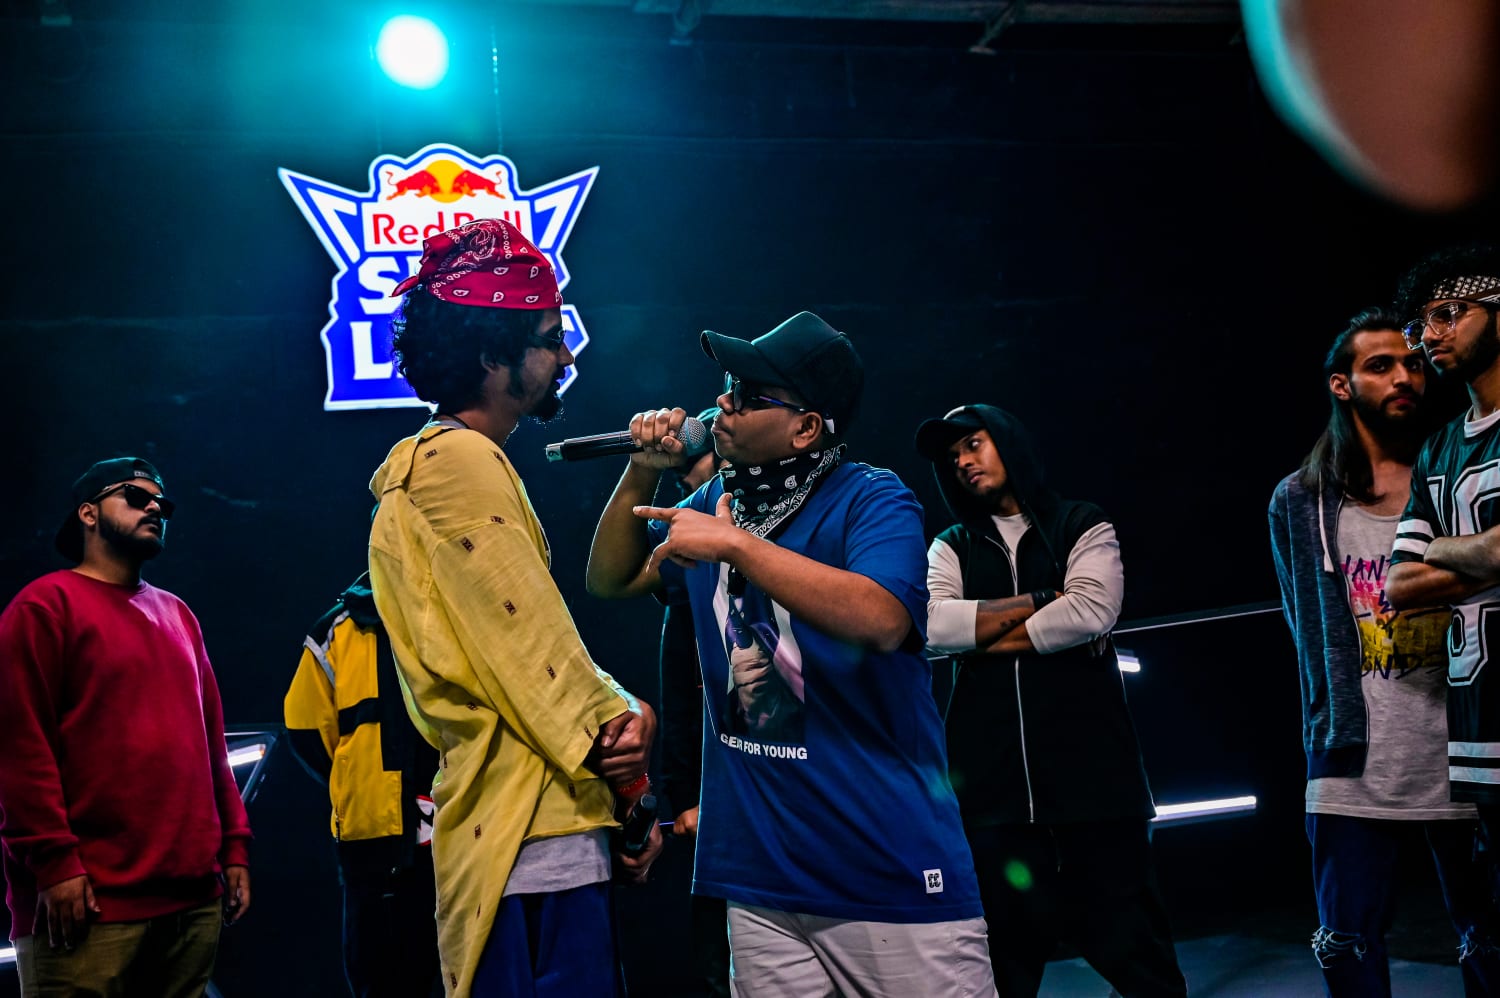 MC Kode and D’Evil on being ruthless in battle